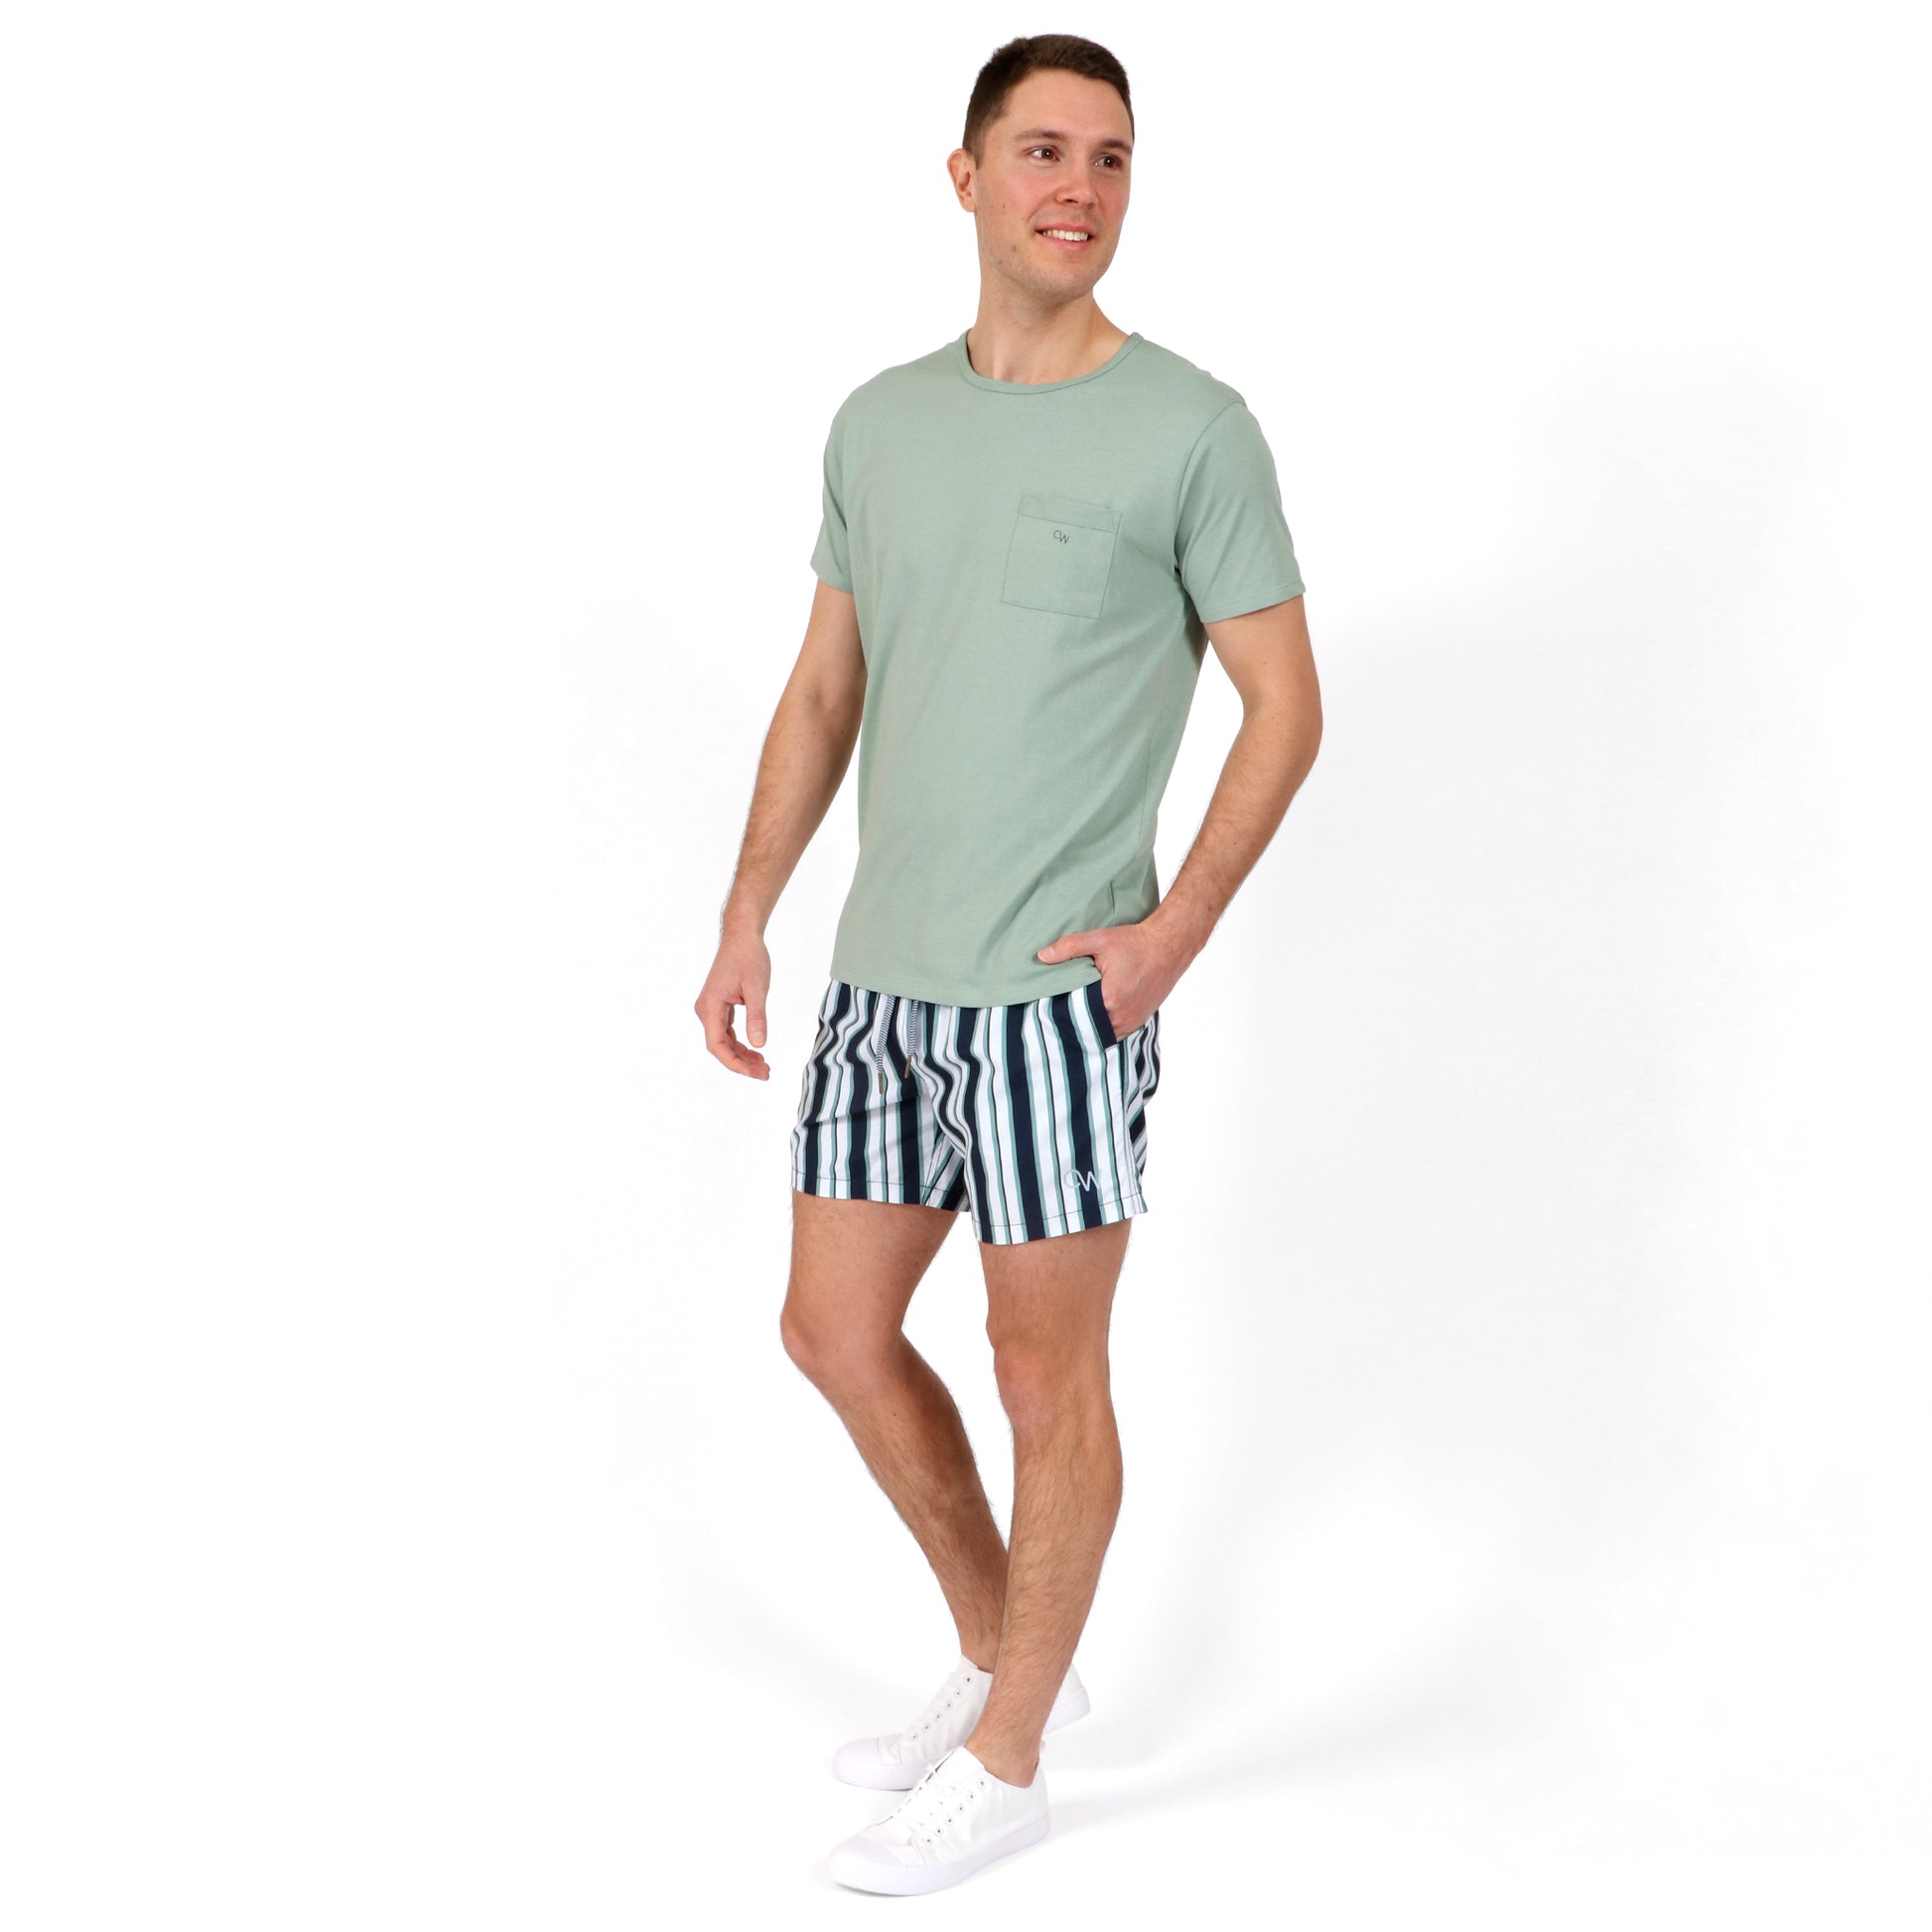 OWSS2106 Boardwalk Blue Stripe Men's Recycled Polyester Swim Short and OWTS2101 Moss green Beach T-Shirt outfit